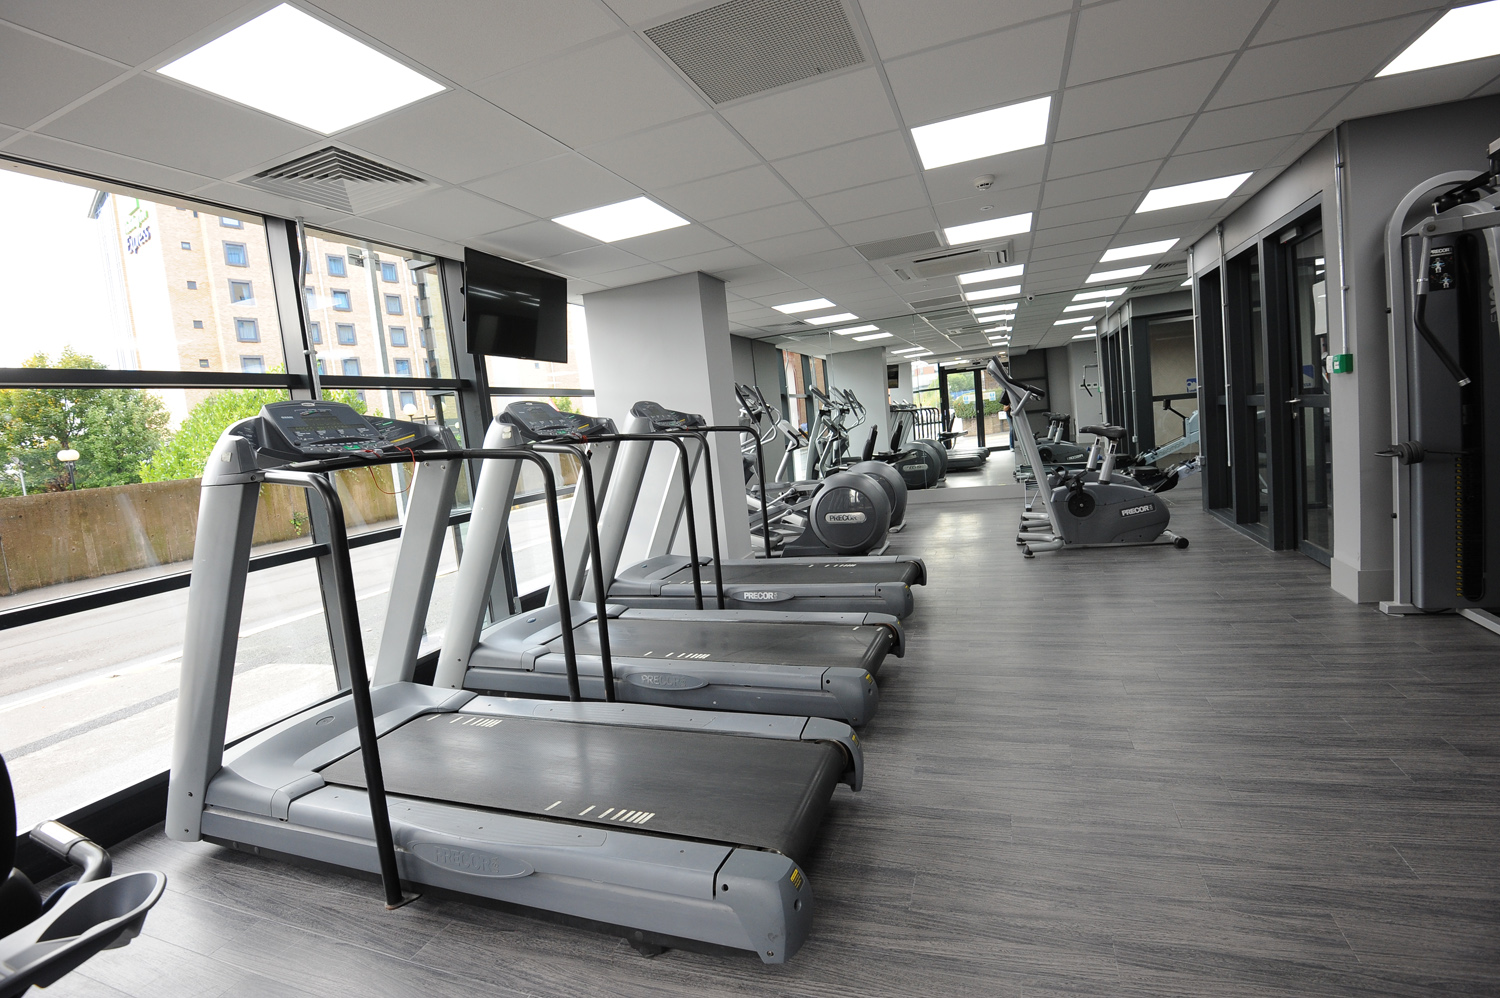 Gym space with treadmills